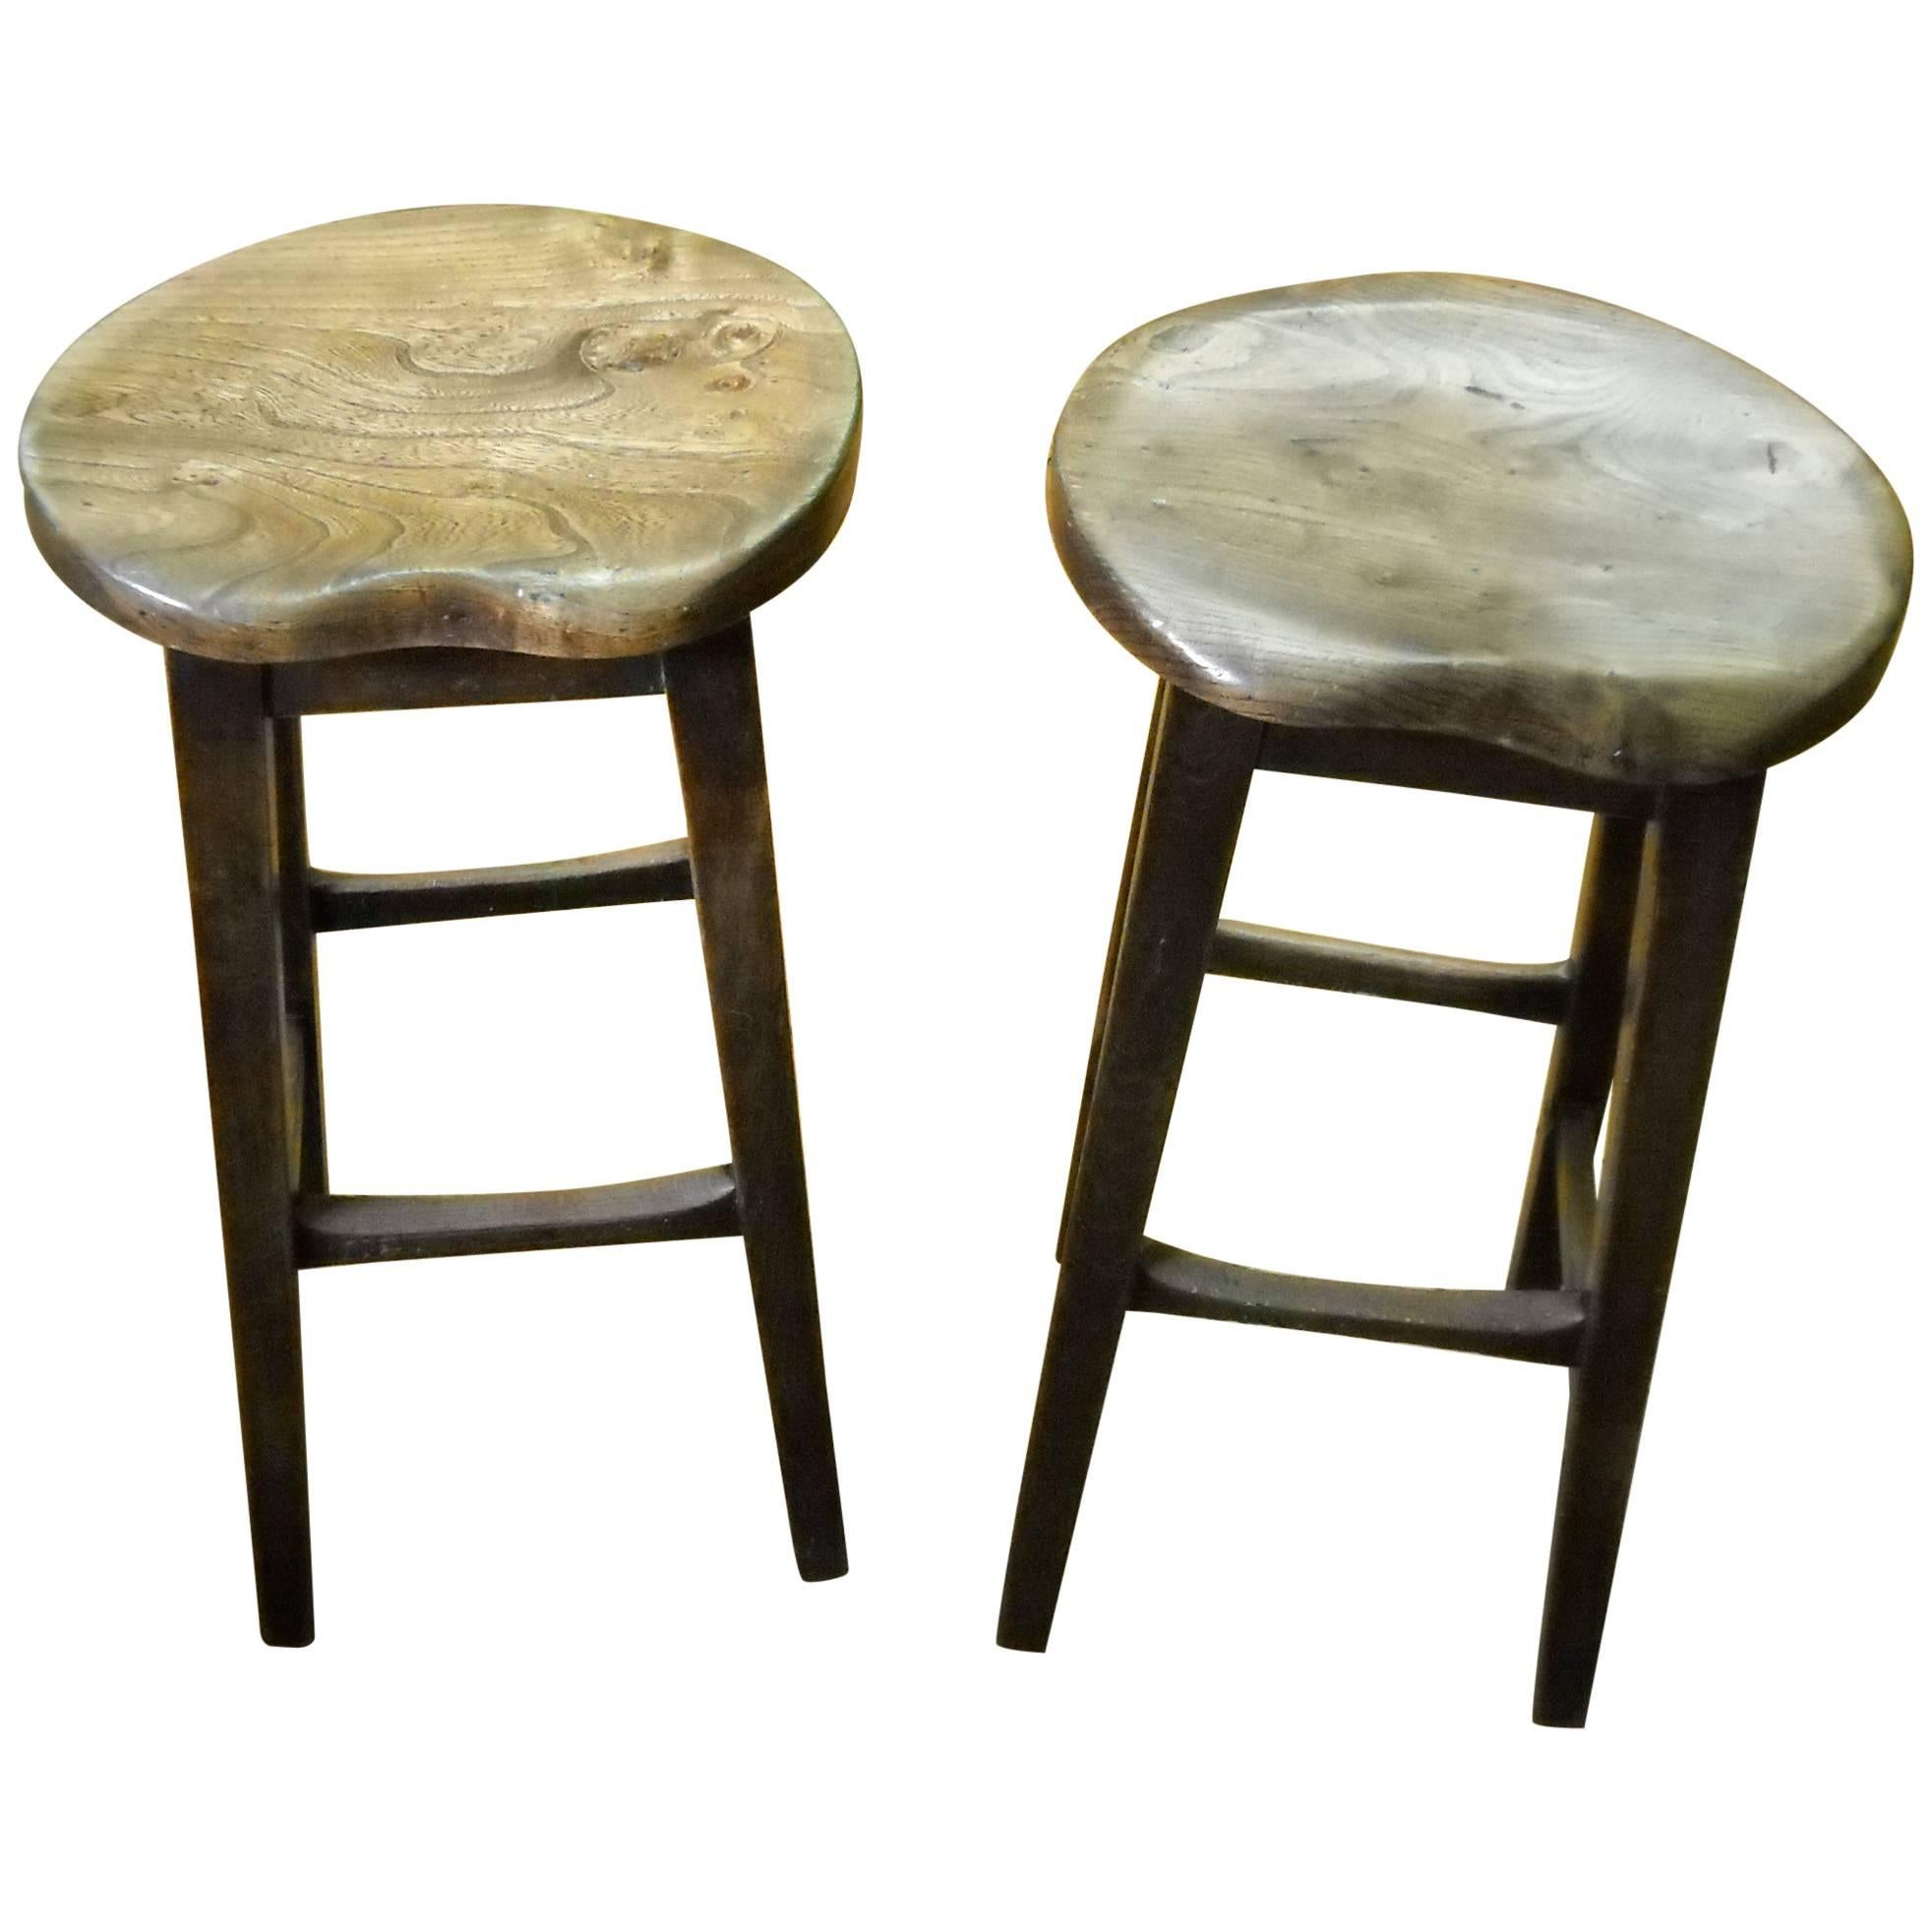 English Stools from a Pub